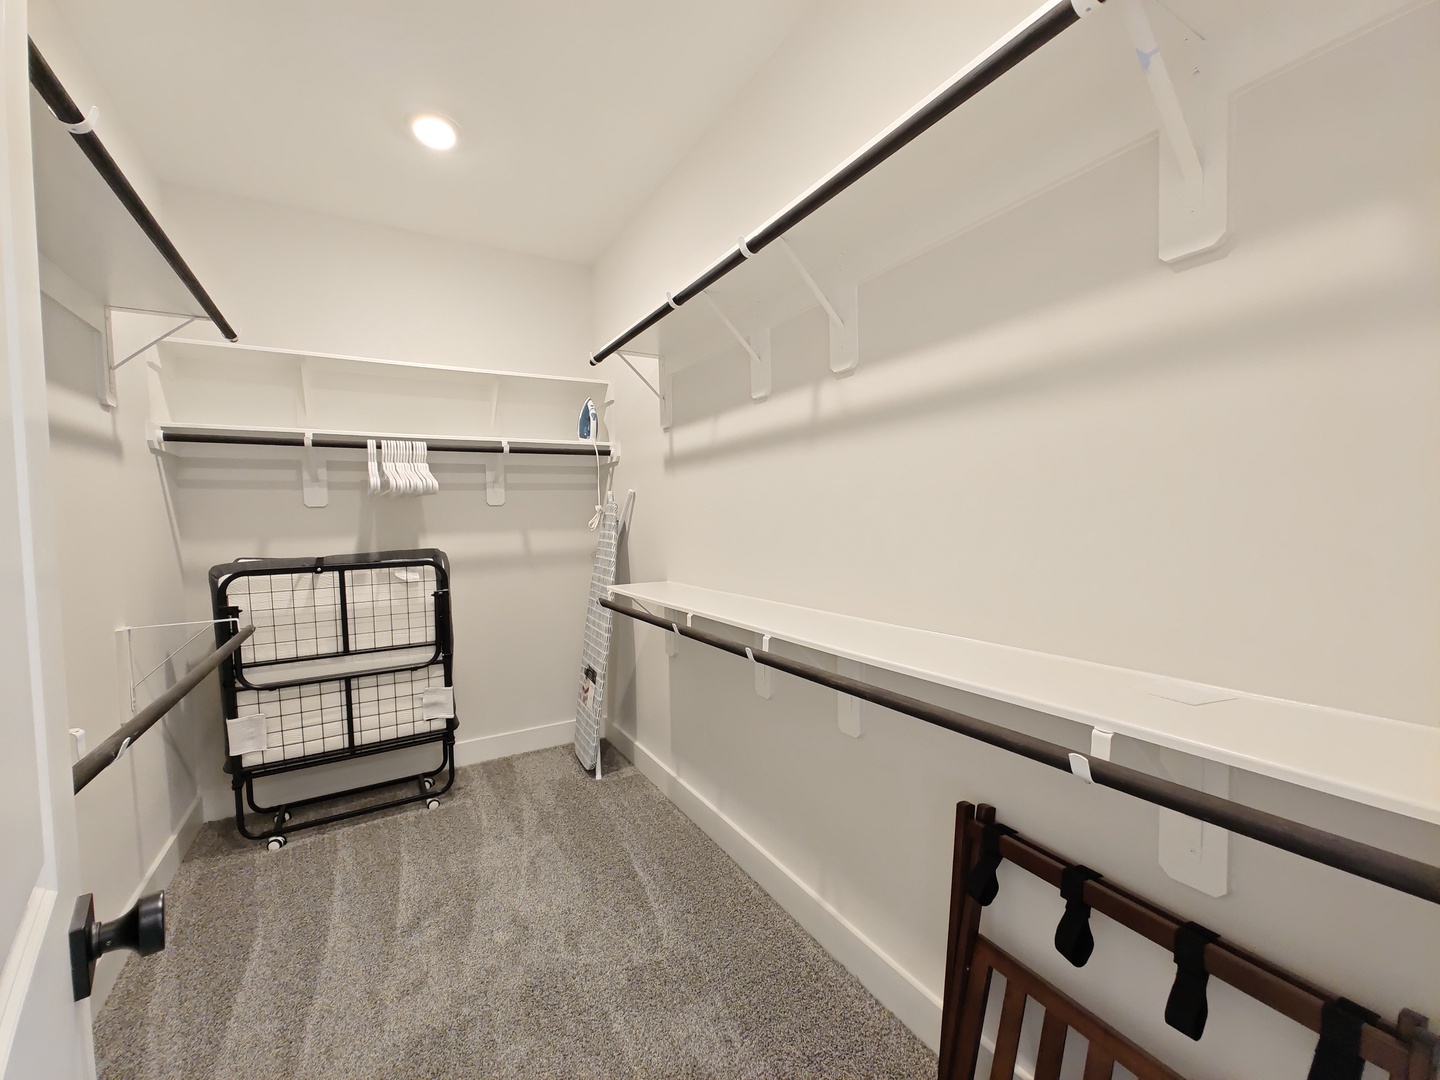 The king suite's walk-in closet offers a rollaway bed & lots of storage